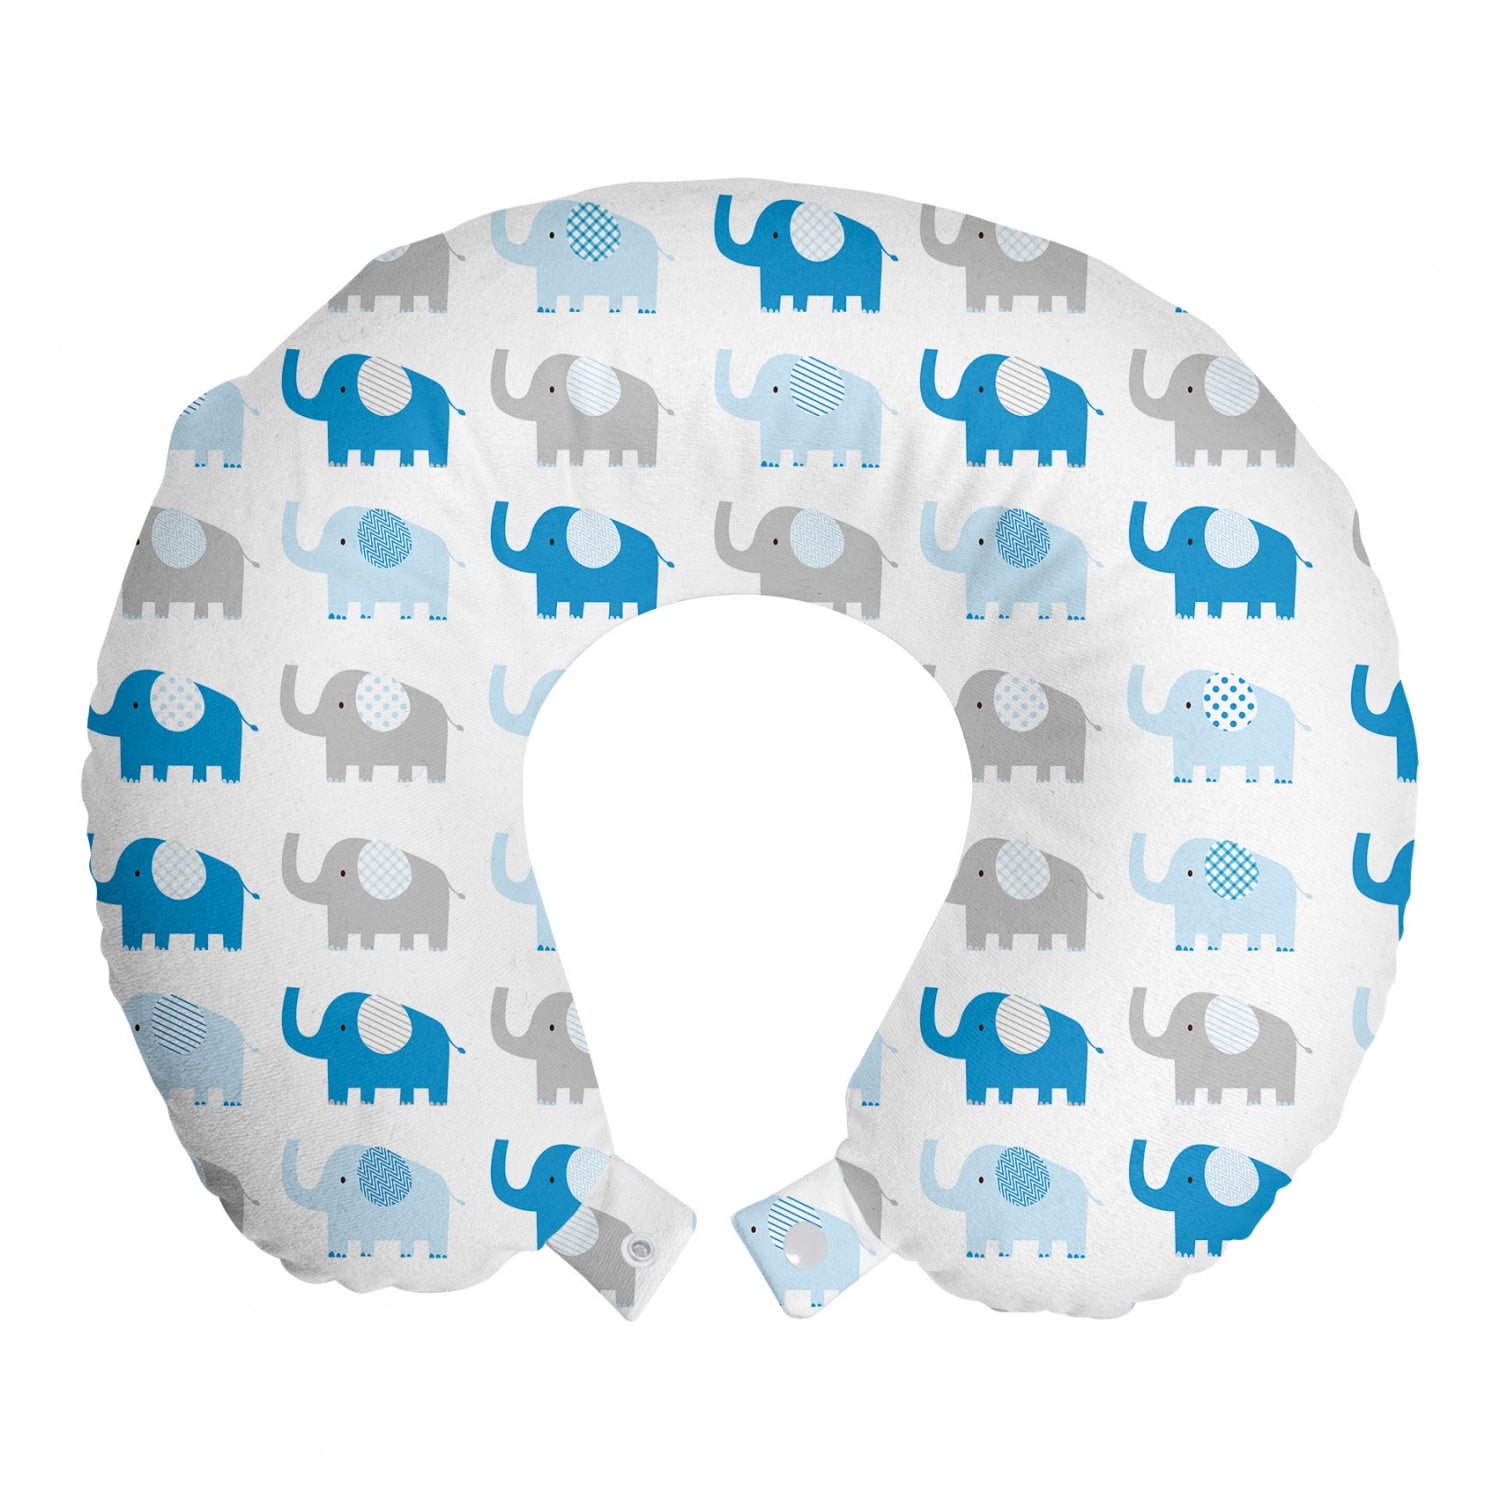 Travel Neck Pillow For Kids Support Neck Cushion For Car Accessories And Camping Essentials Travel Accessories Pillows For Sleeping Outdoor Cushions Elephant 